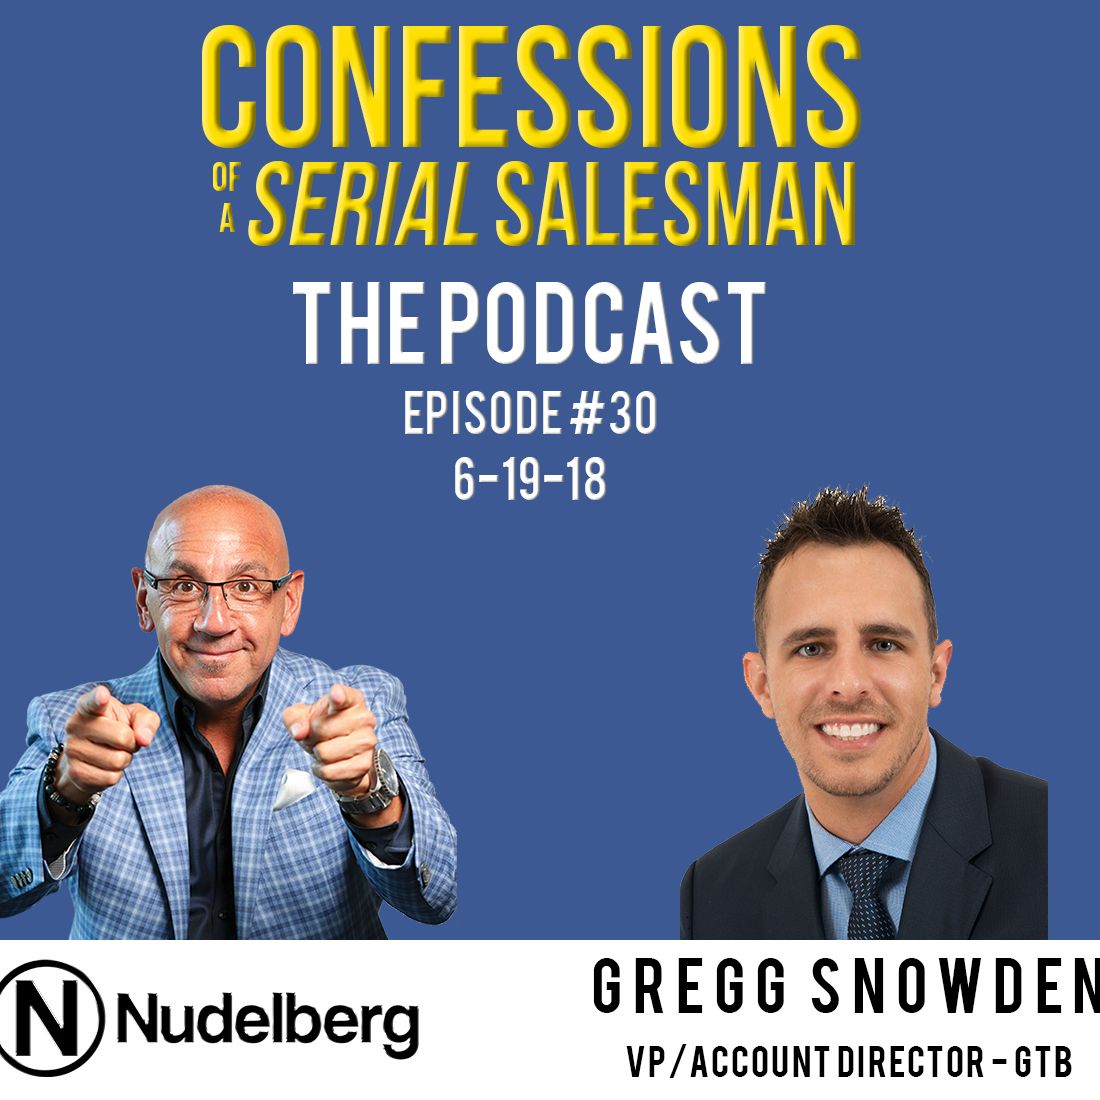 Confessions of a Serial Salesman The Podcast with Gregg Snowden, VP at GTB (Global Team Blue)